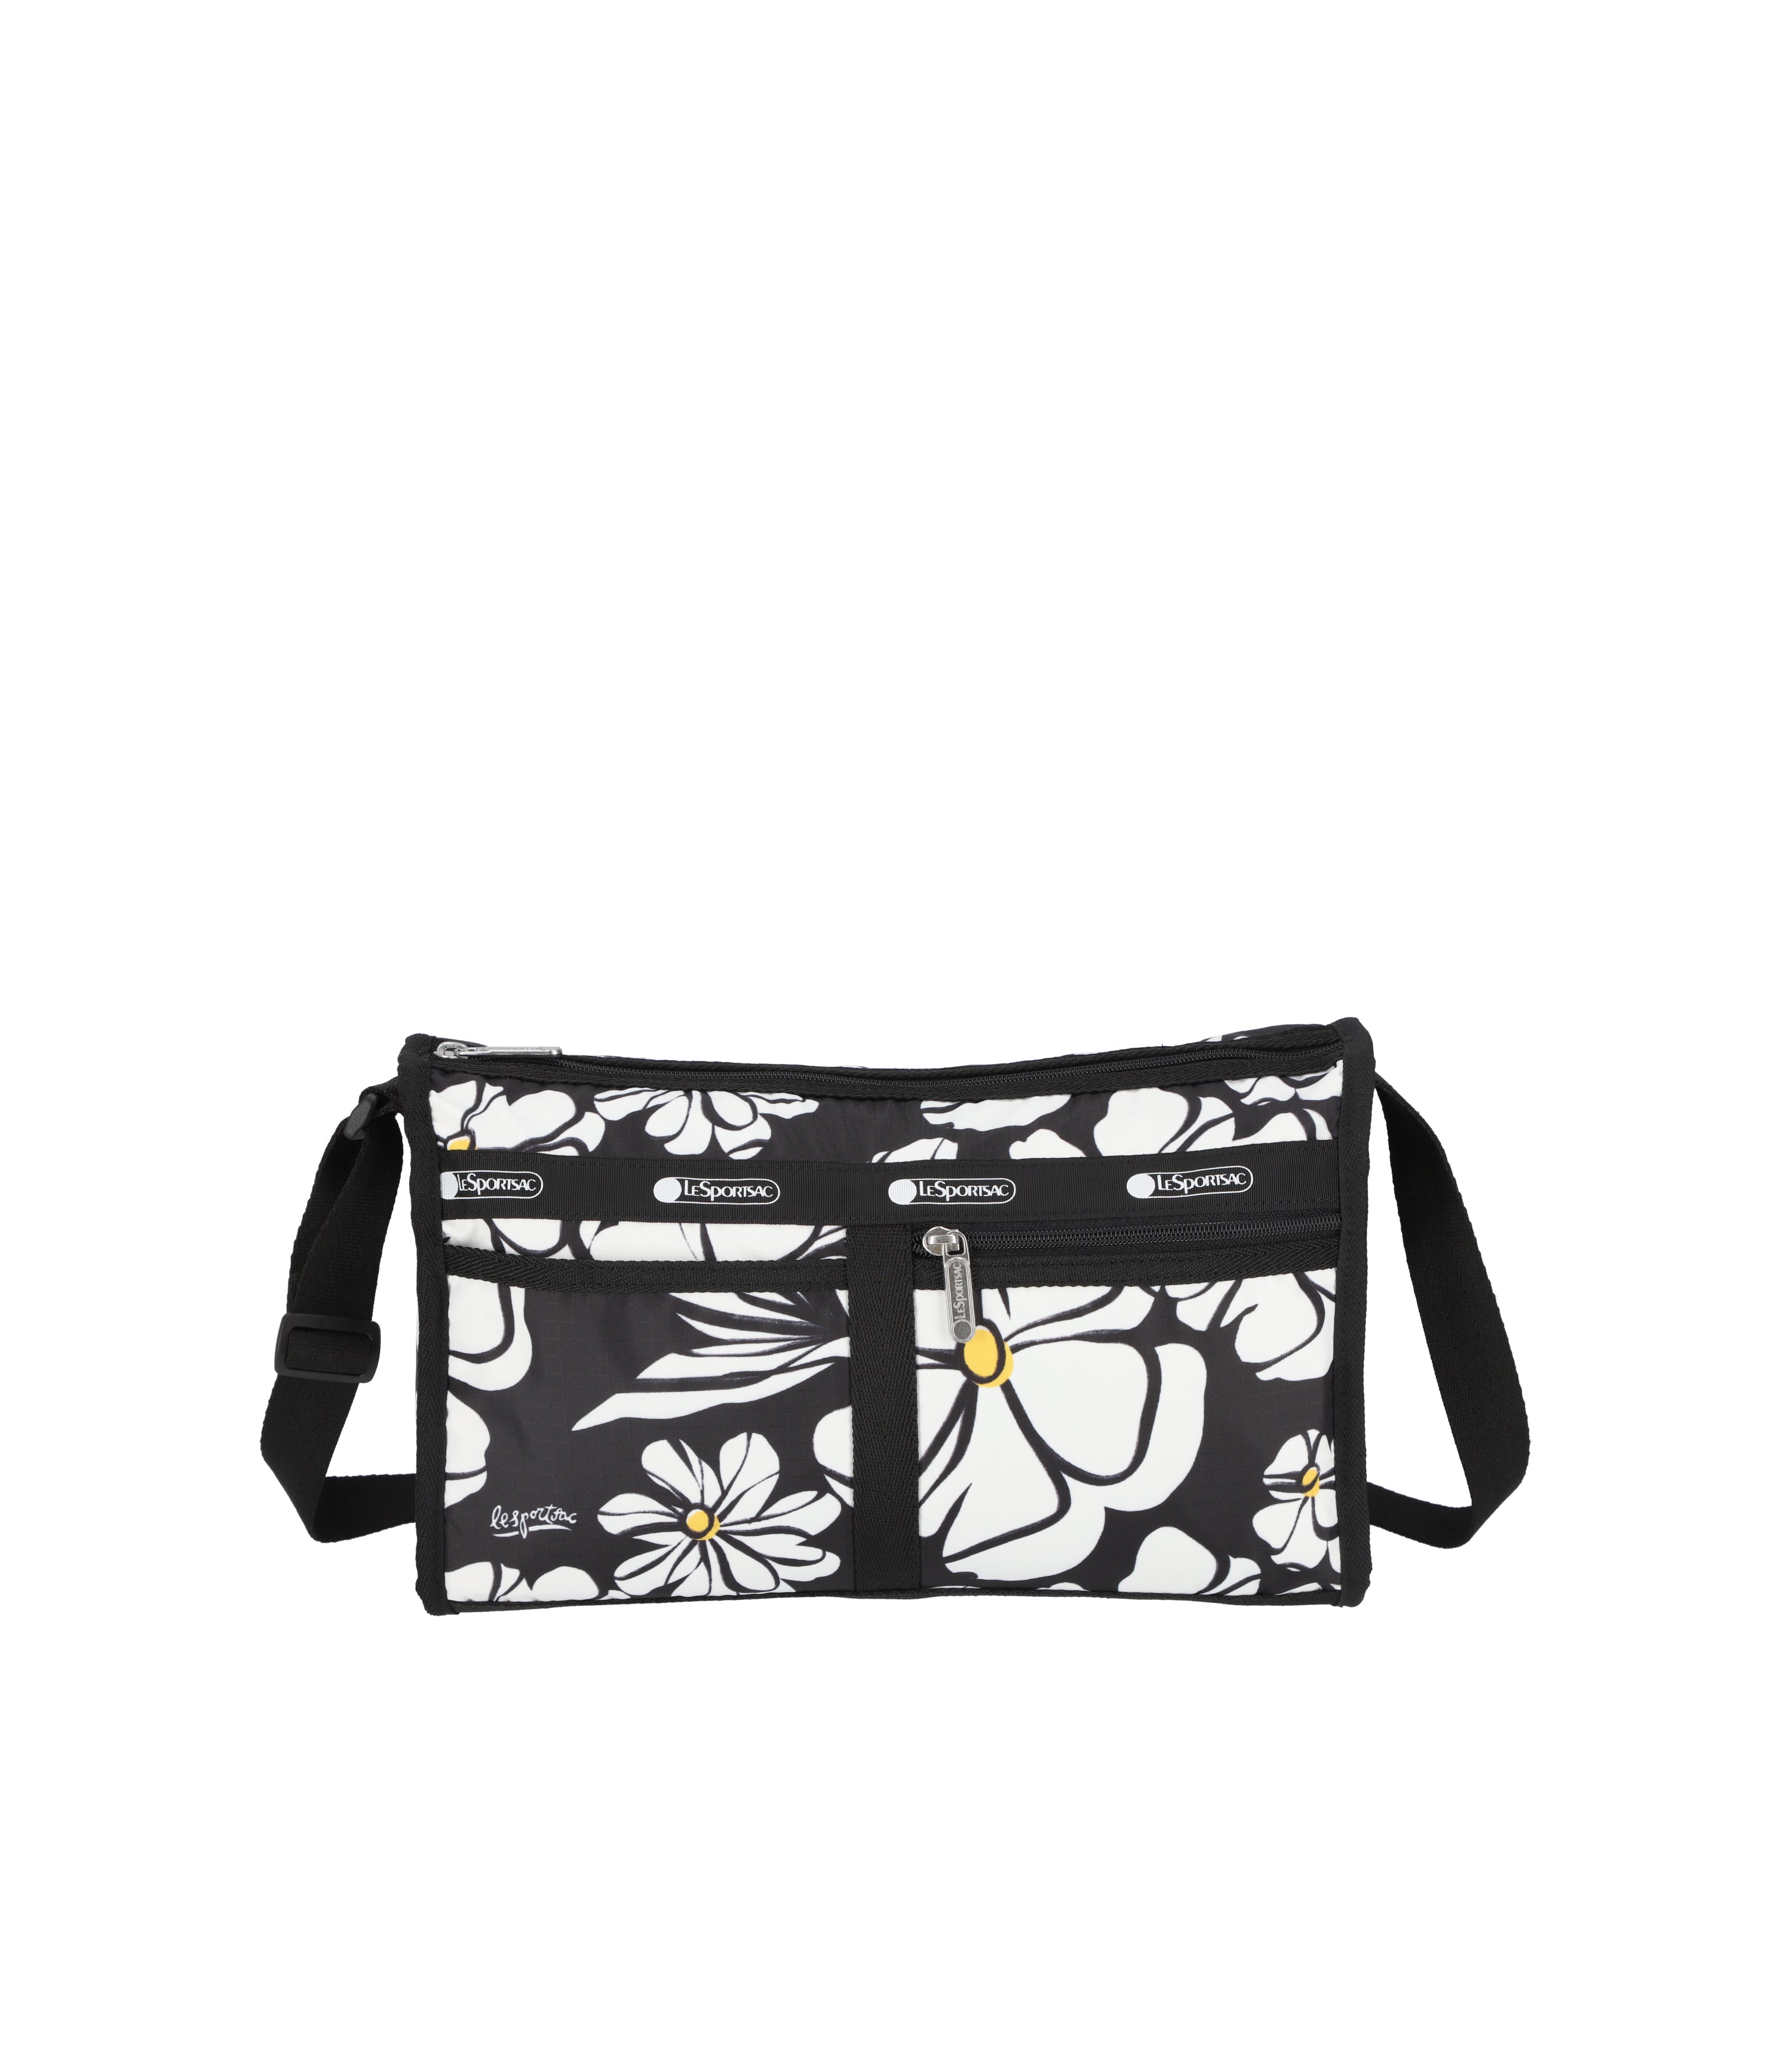 Lesportsac Deluxe Everyday Bag Black